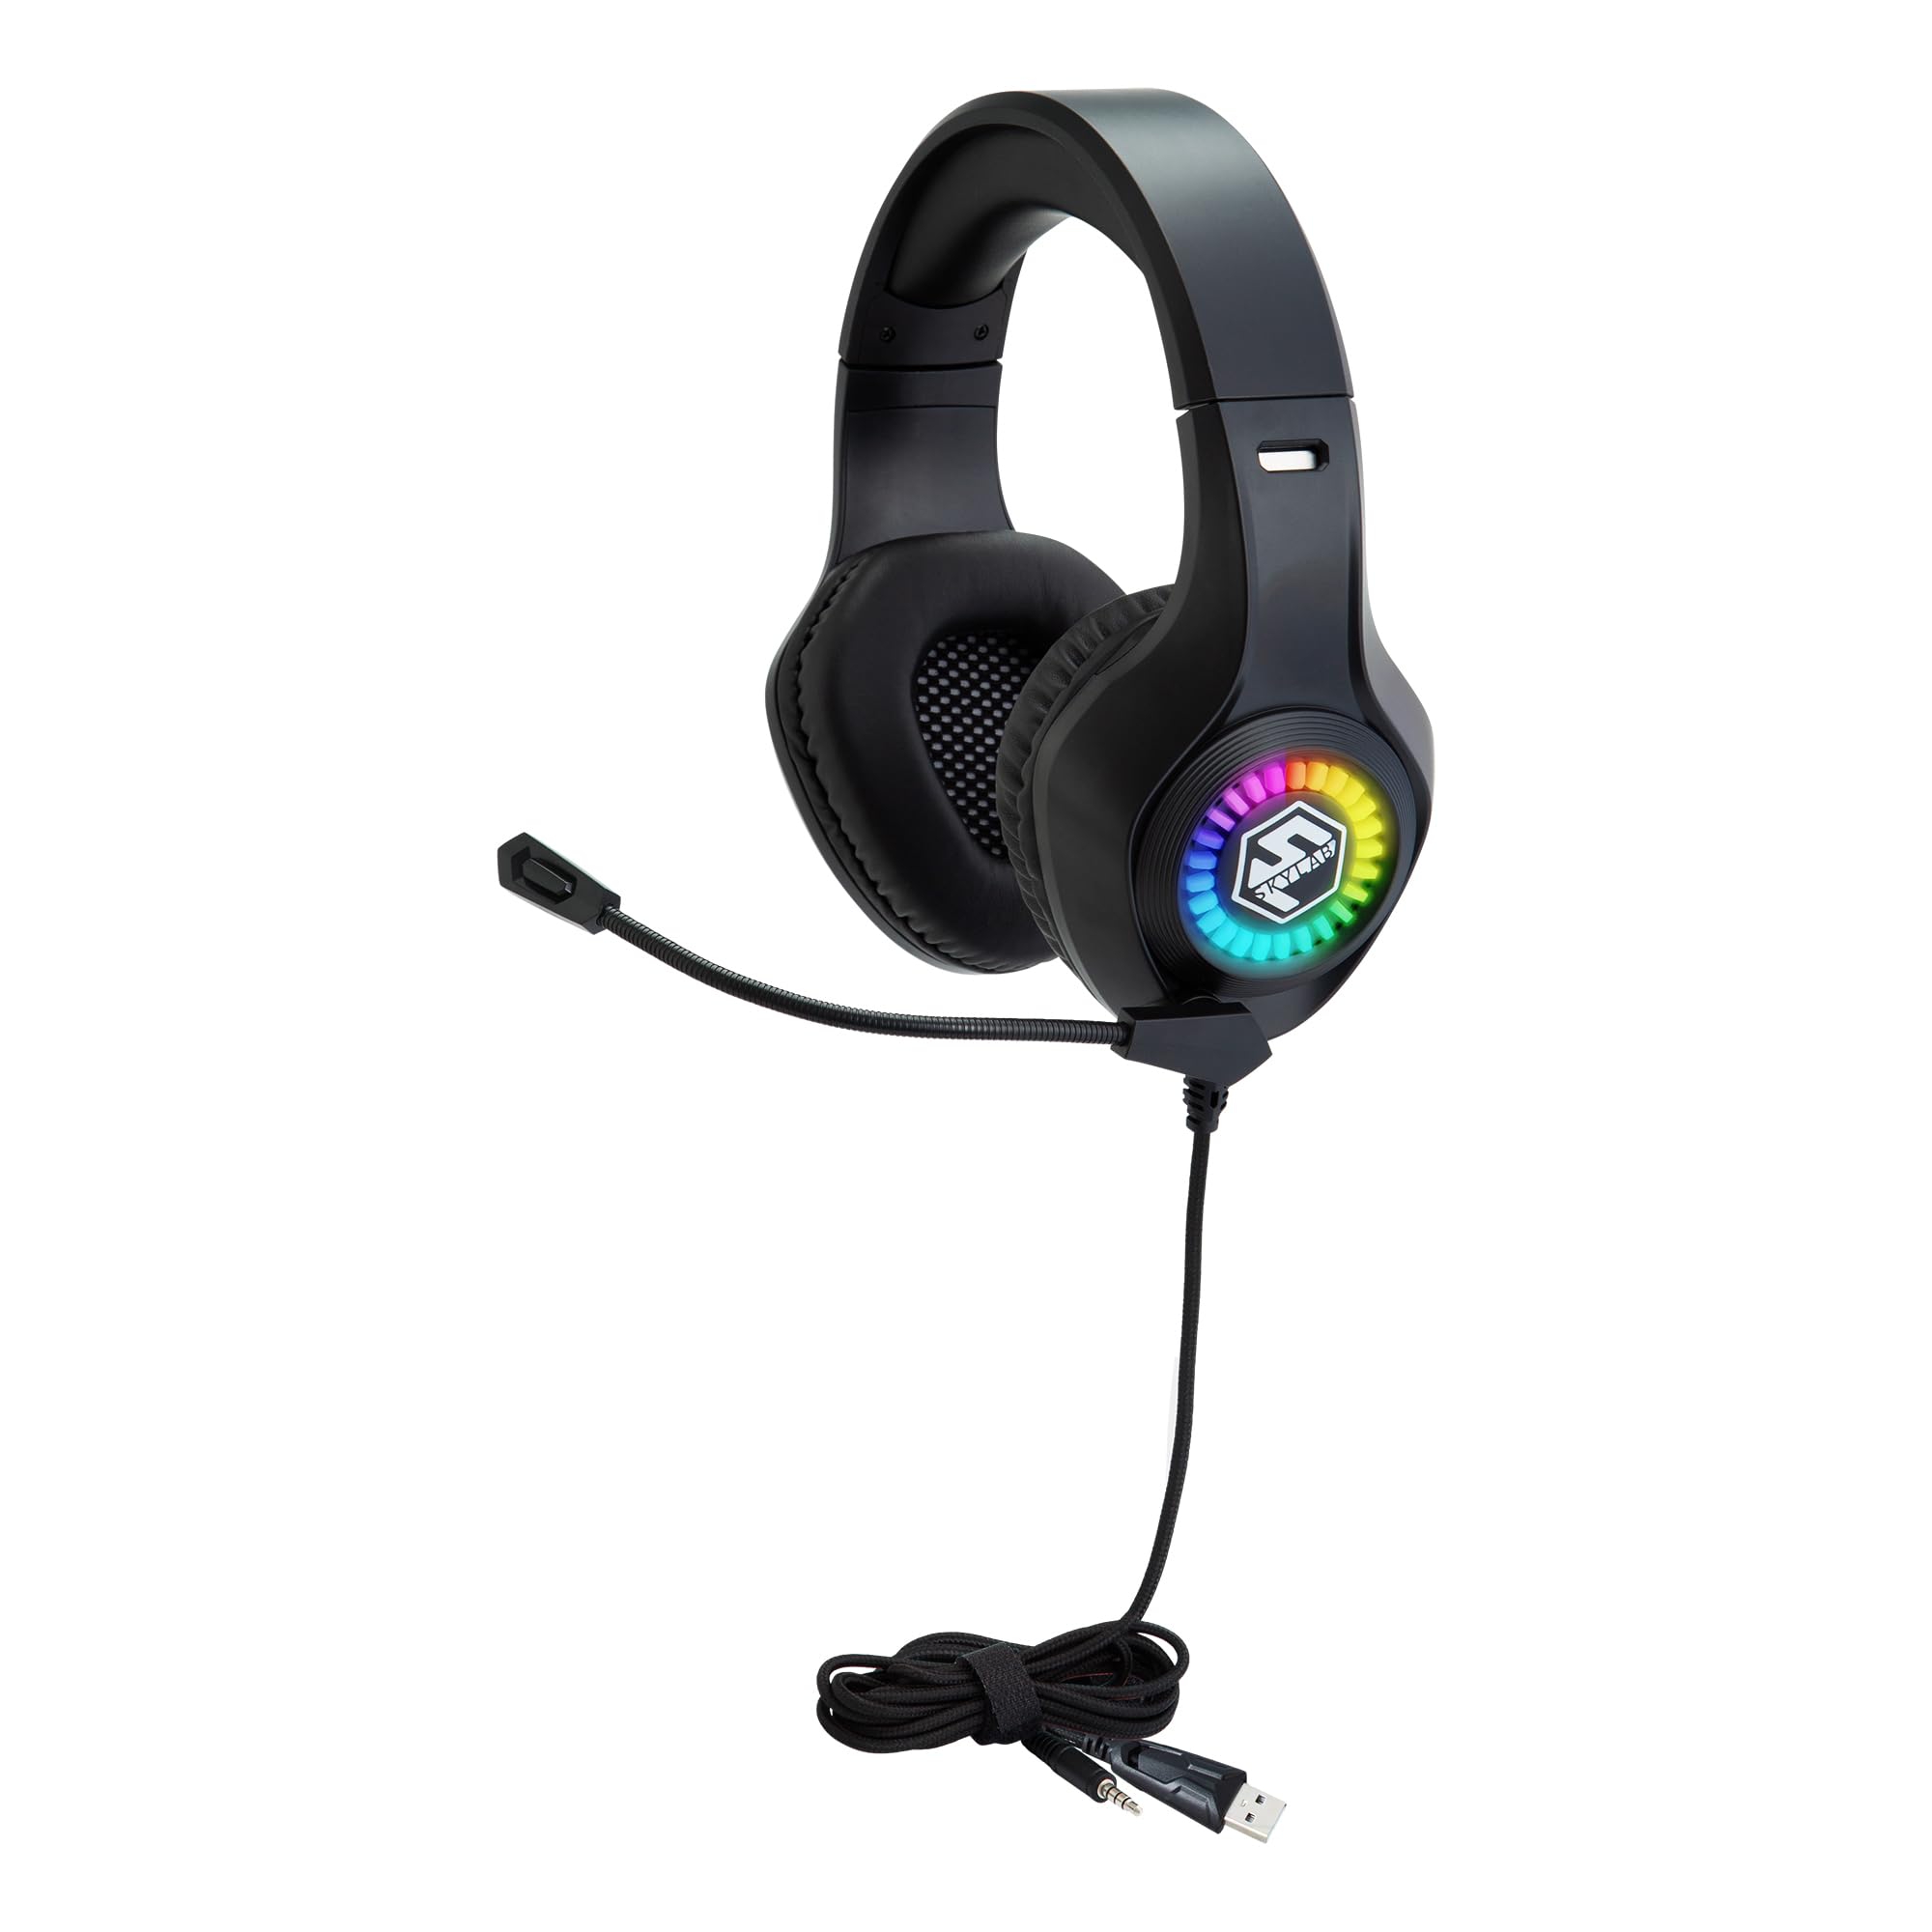 Egghead Skylab LED Stereo Gaming Multimedia Headset, Over Ear Headphones with Volume Control and Noise Cancelling Flexible Mic, Black